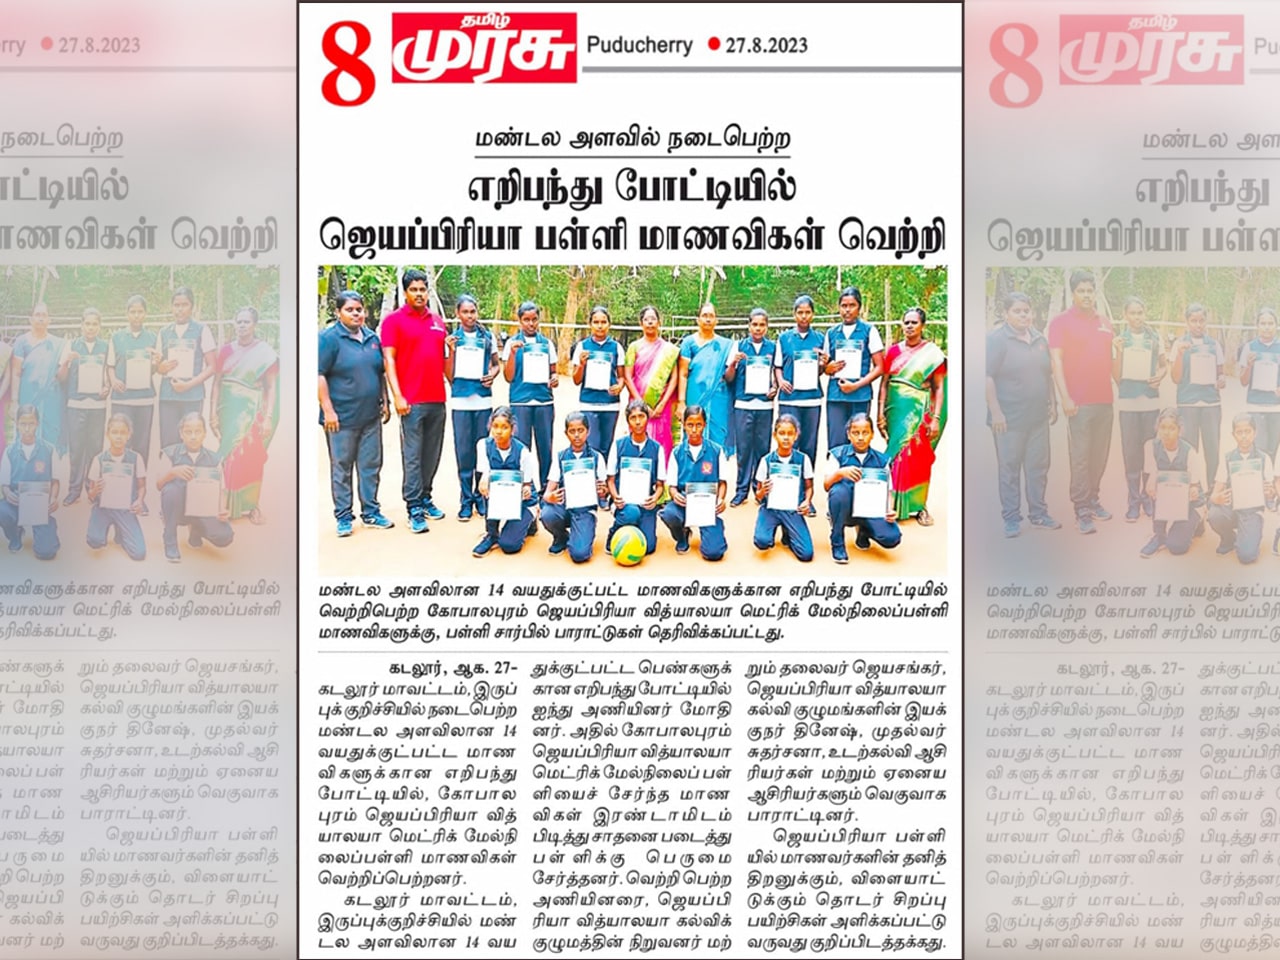 MURASU - Won the zonal level throwball competition.